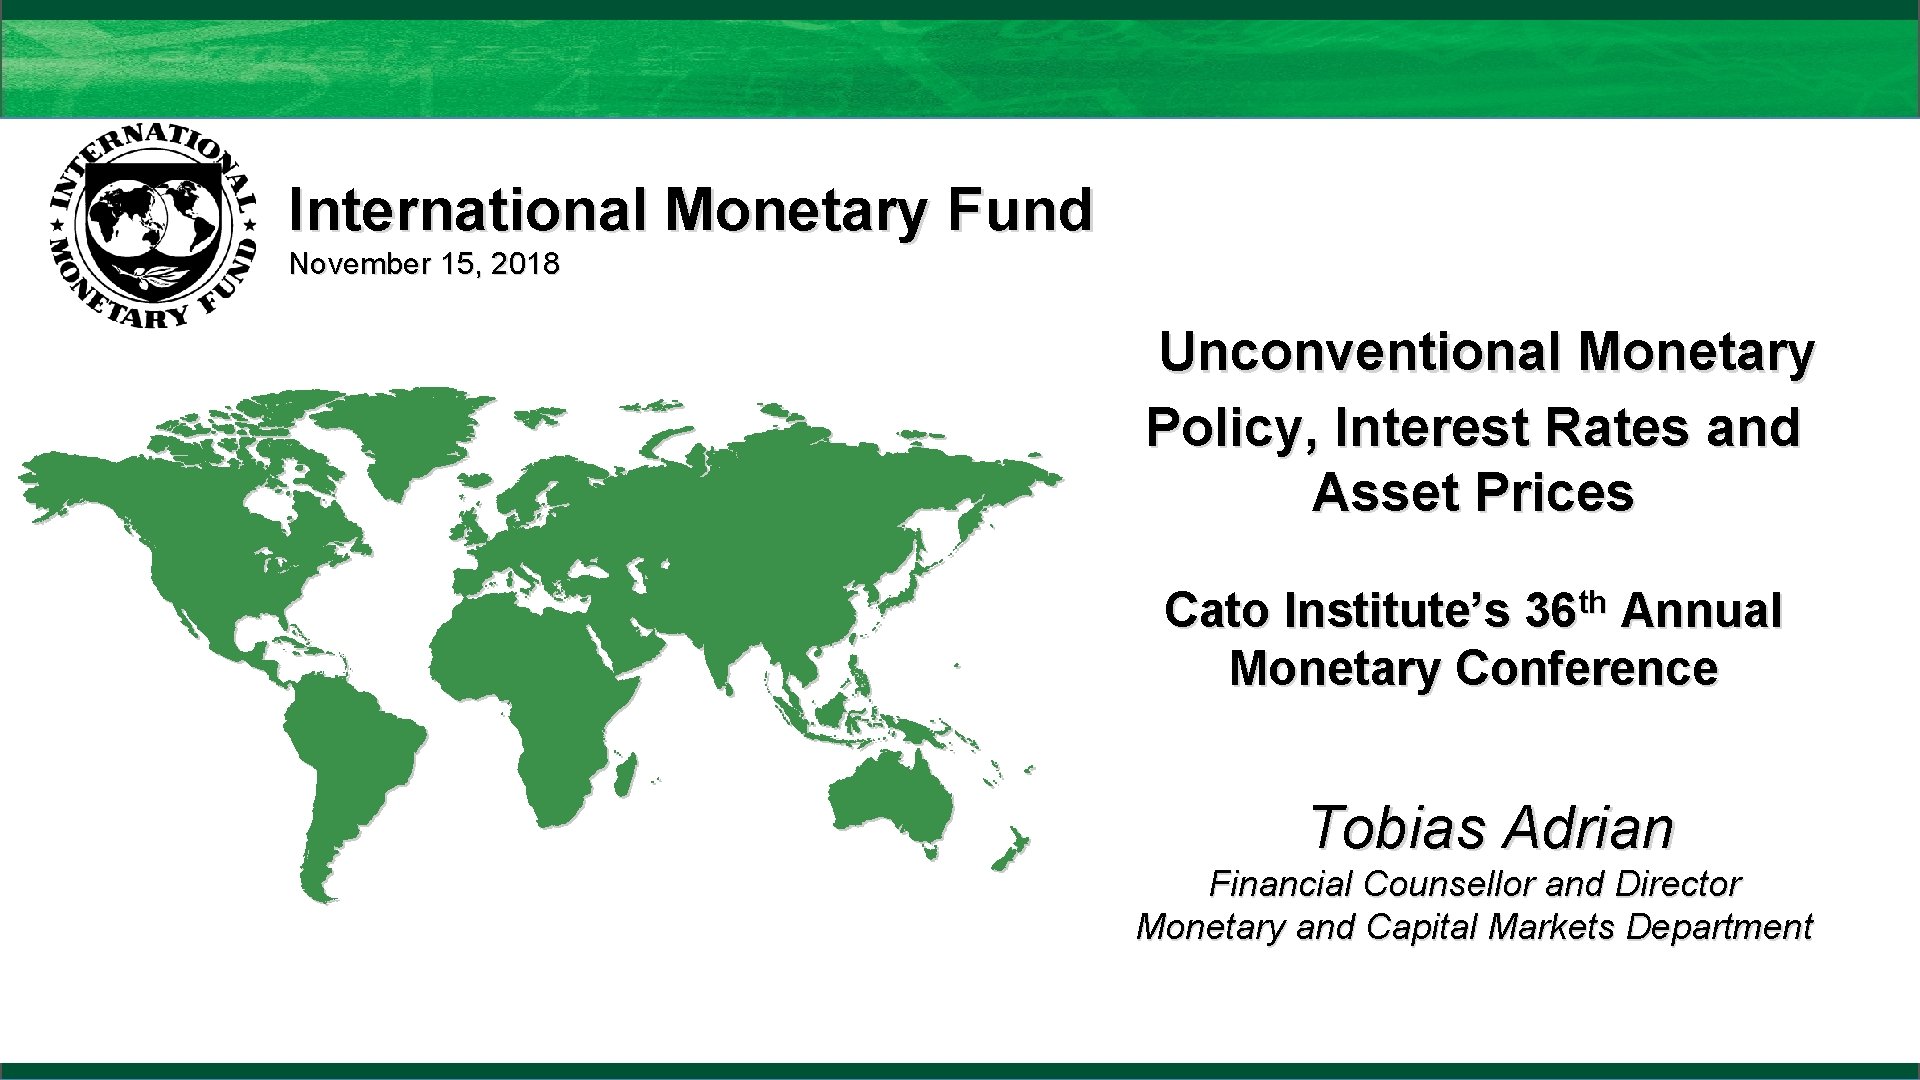 International Monetary Fund November 15, 2018 Unconventional Monetary Policy, Interest Rates and Asset Prices